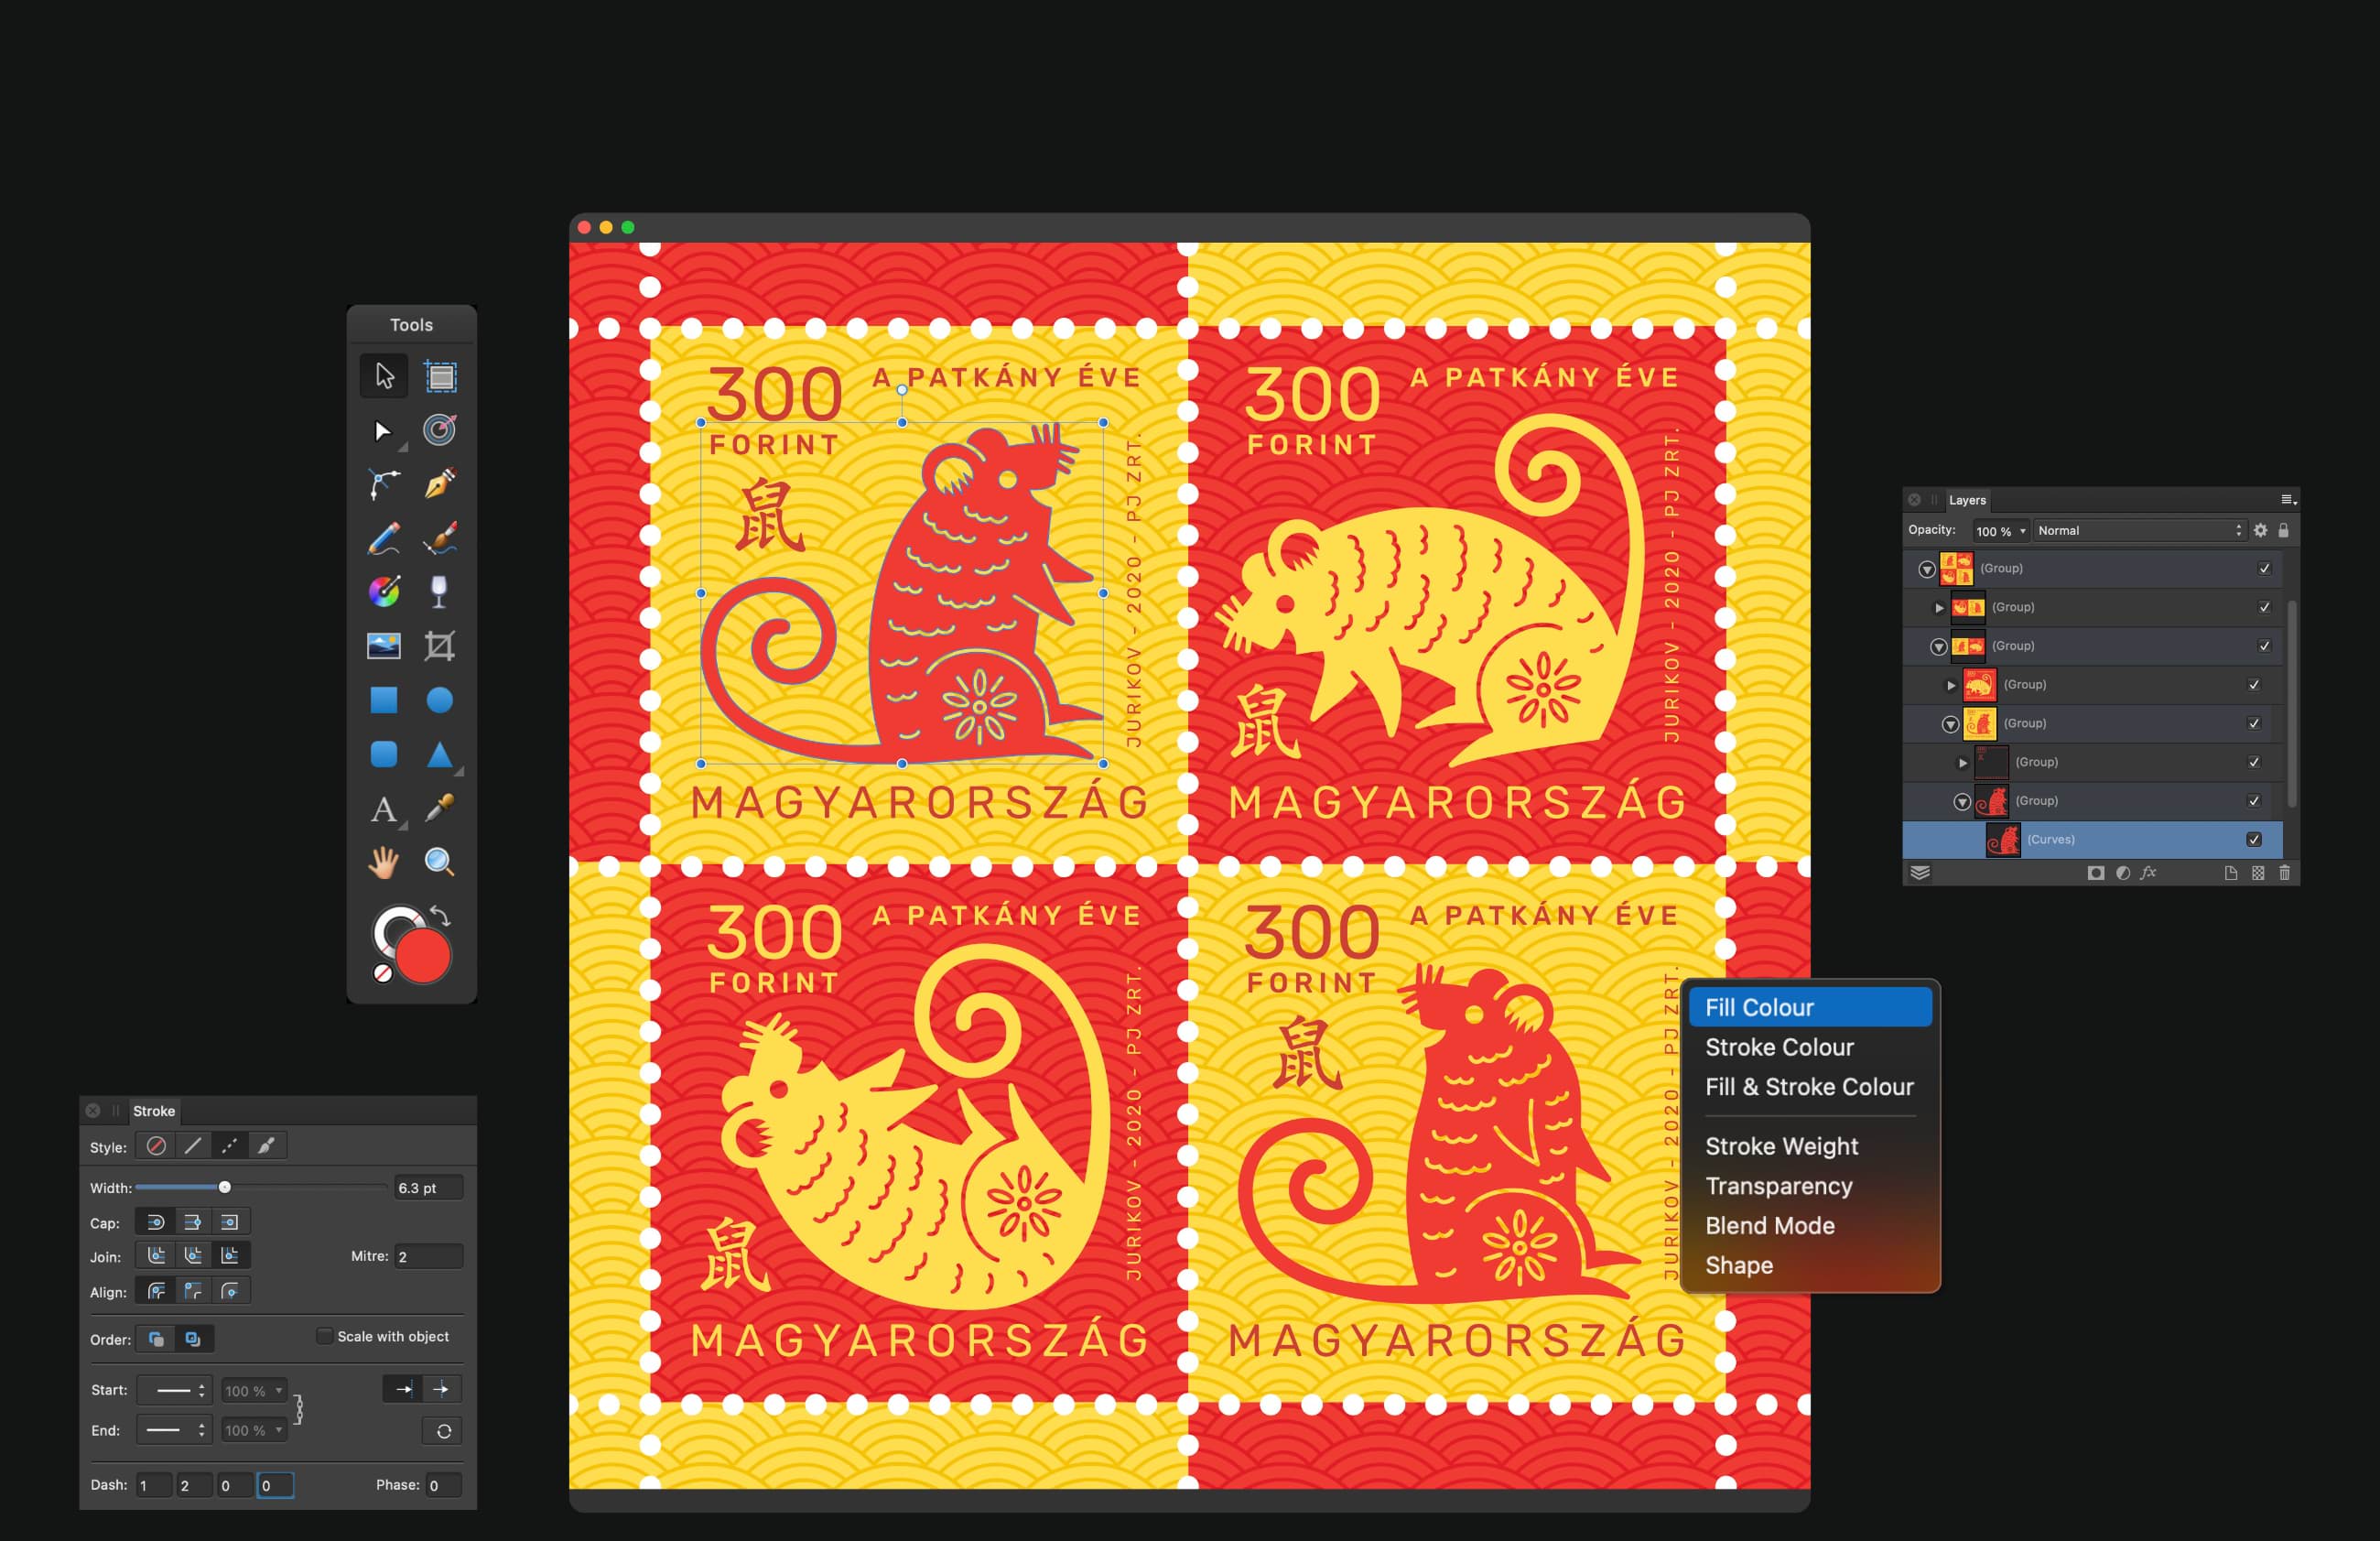 Menu with Fill Color selected atop a red and yellow set of stamps, surrounded by other open menus and tools